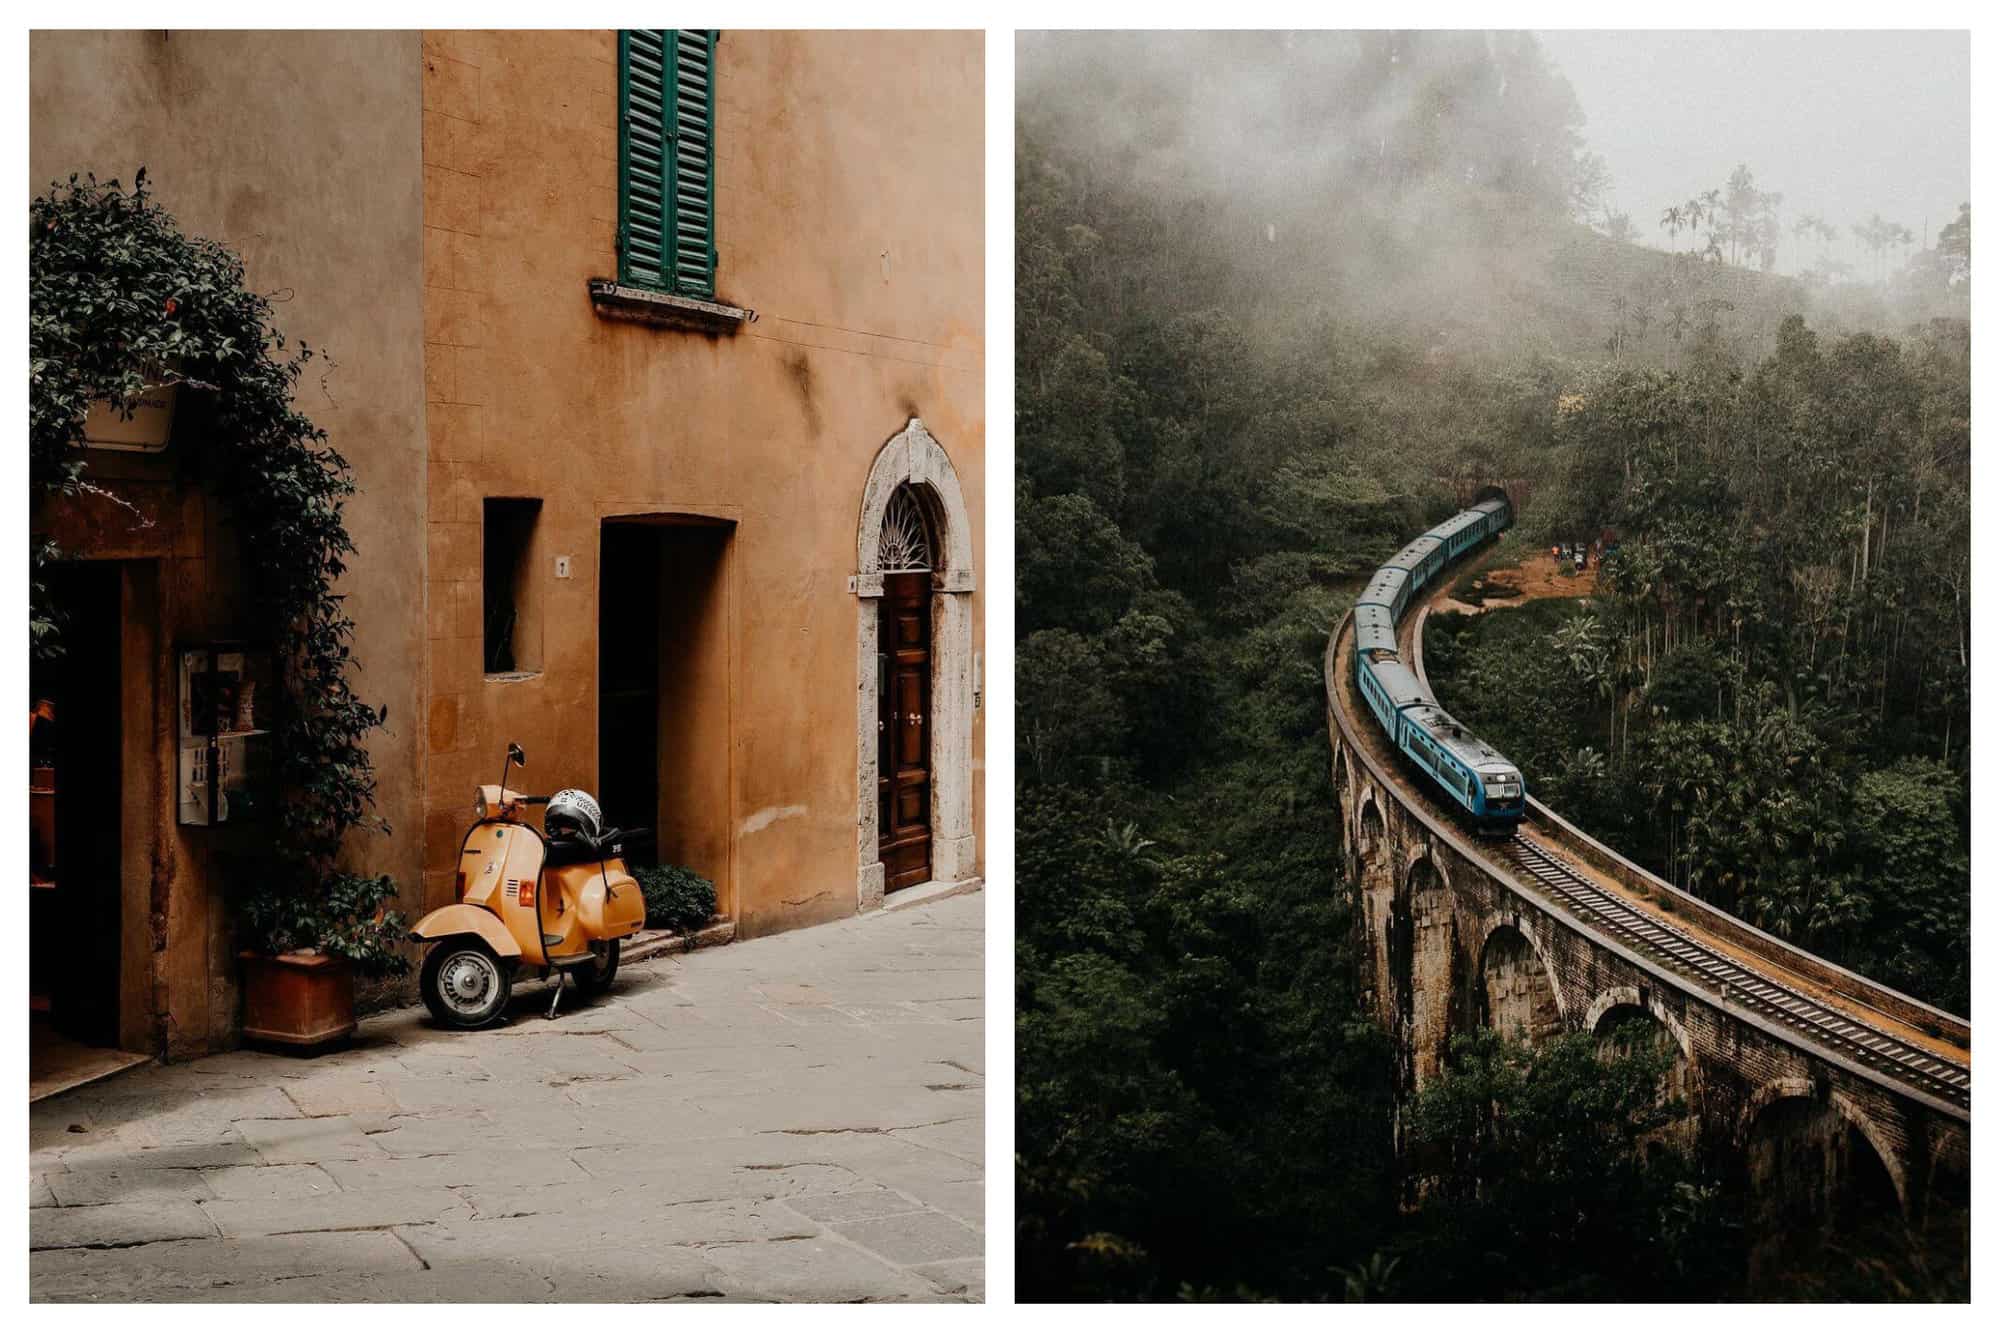 An old orange scooter is parked next the faded walls of a townhouse in Pienza. A train travels over a viaduct through the forests of Nepal.